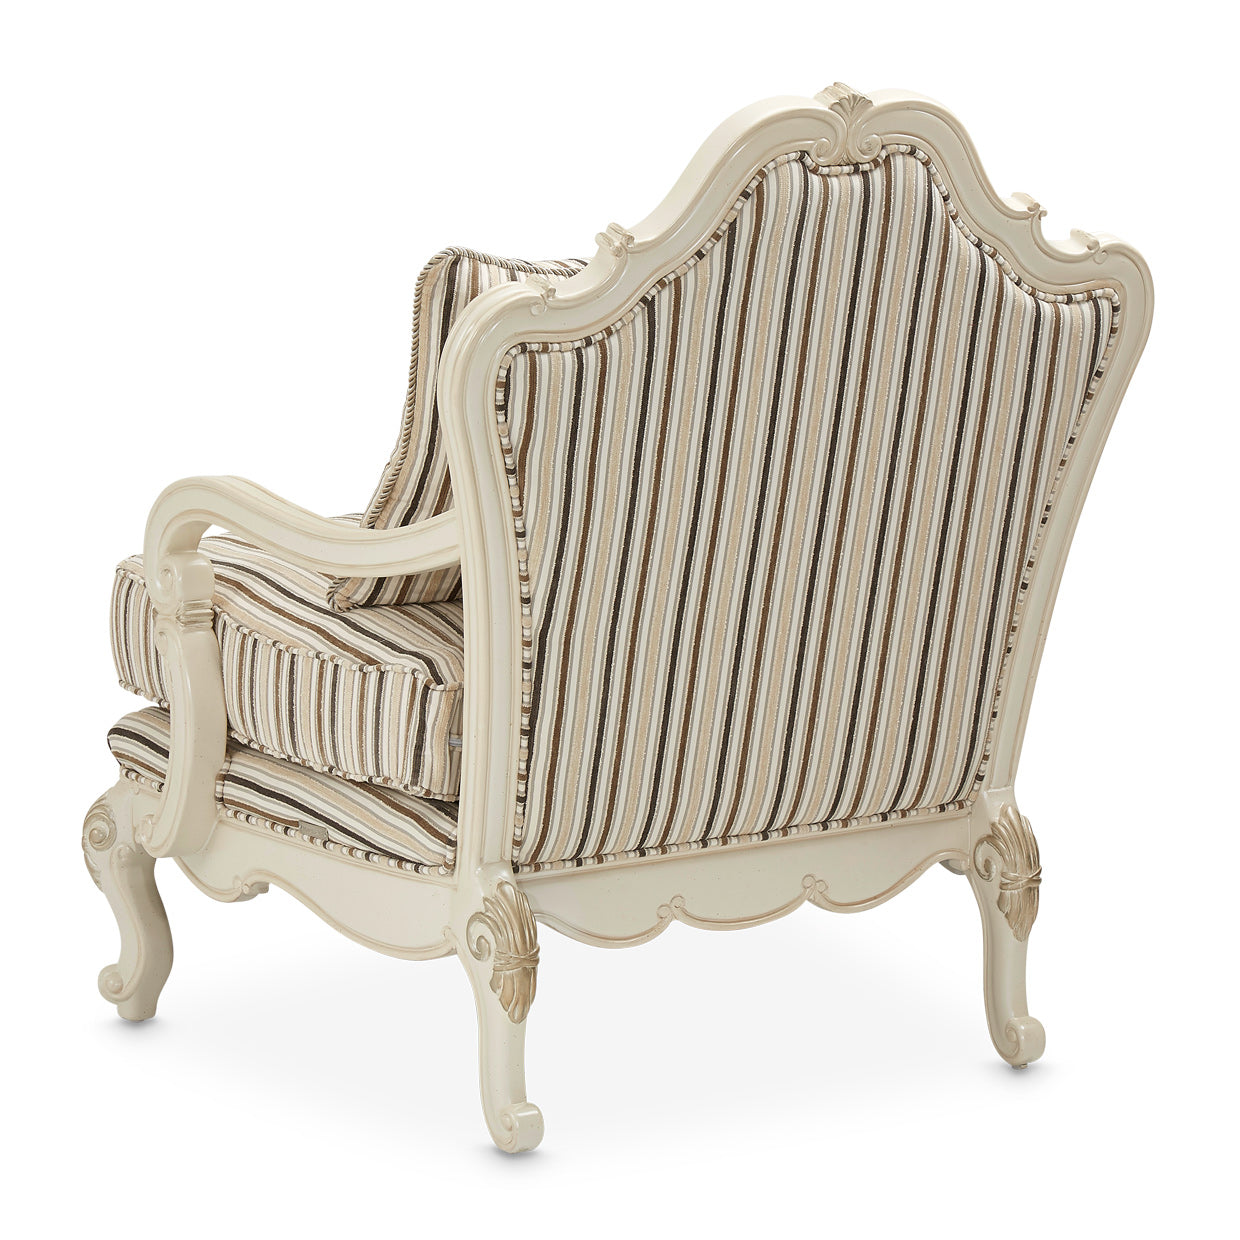 LAVELLE-CLASSIC PEARL Lavelle Bergere Wood Chair Birch Classic Pearl - Dream art Gallery